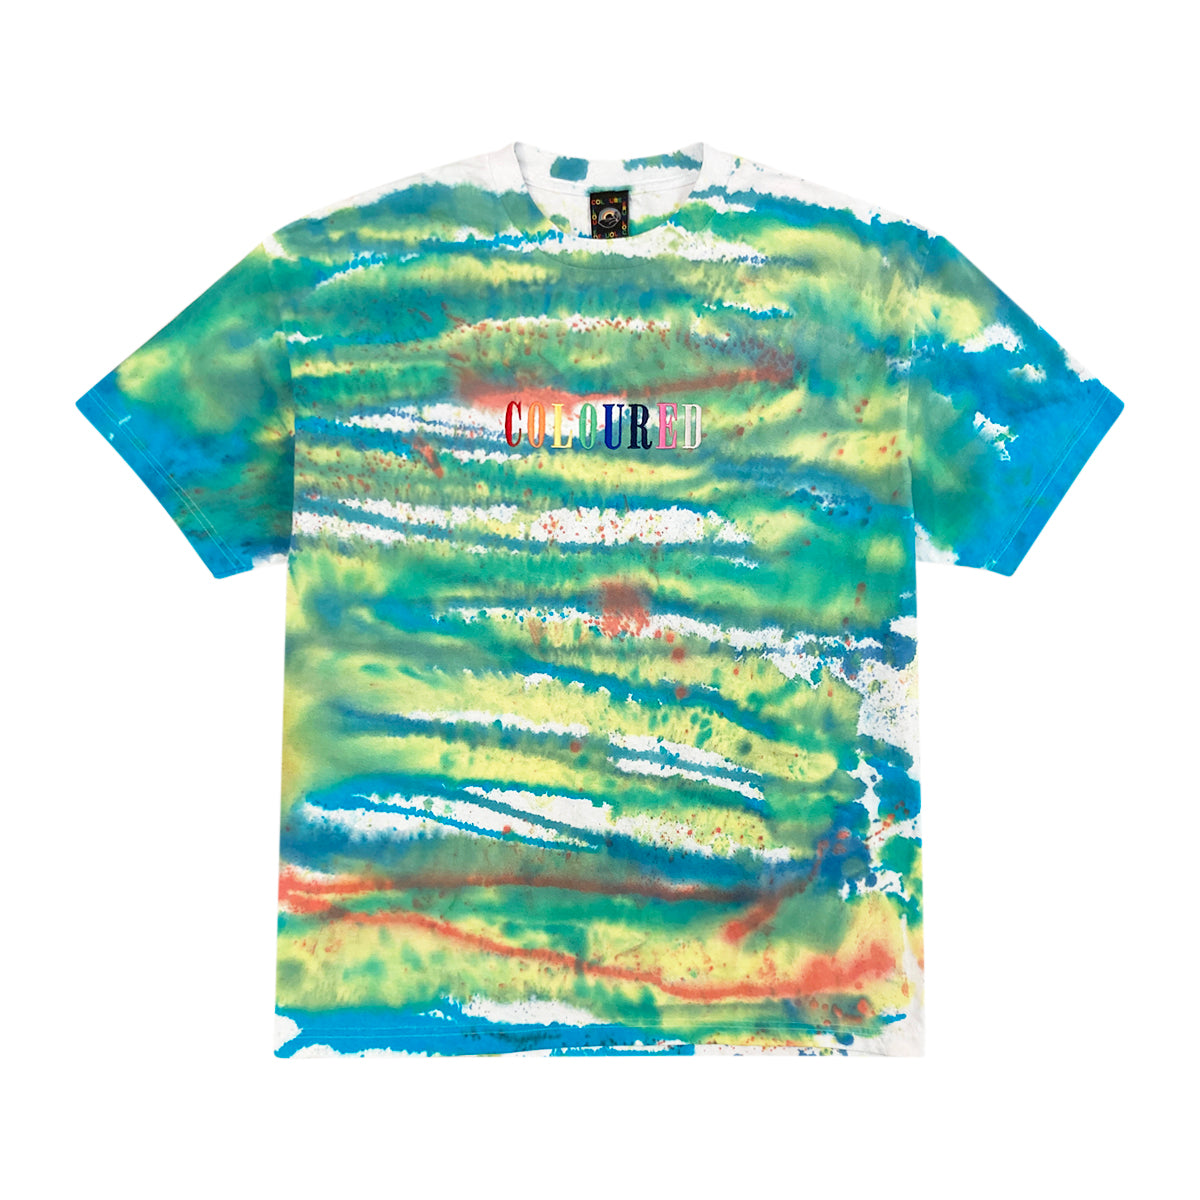 An image of a white t-shirt with dyed colorful stripes and "COLOURED" embroidered in rainbow colors.